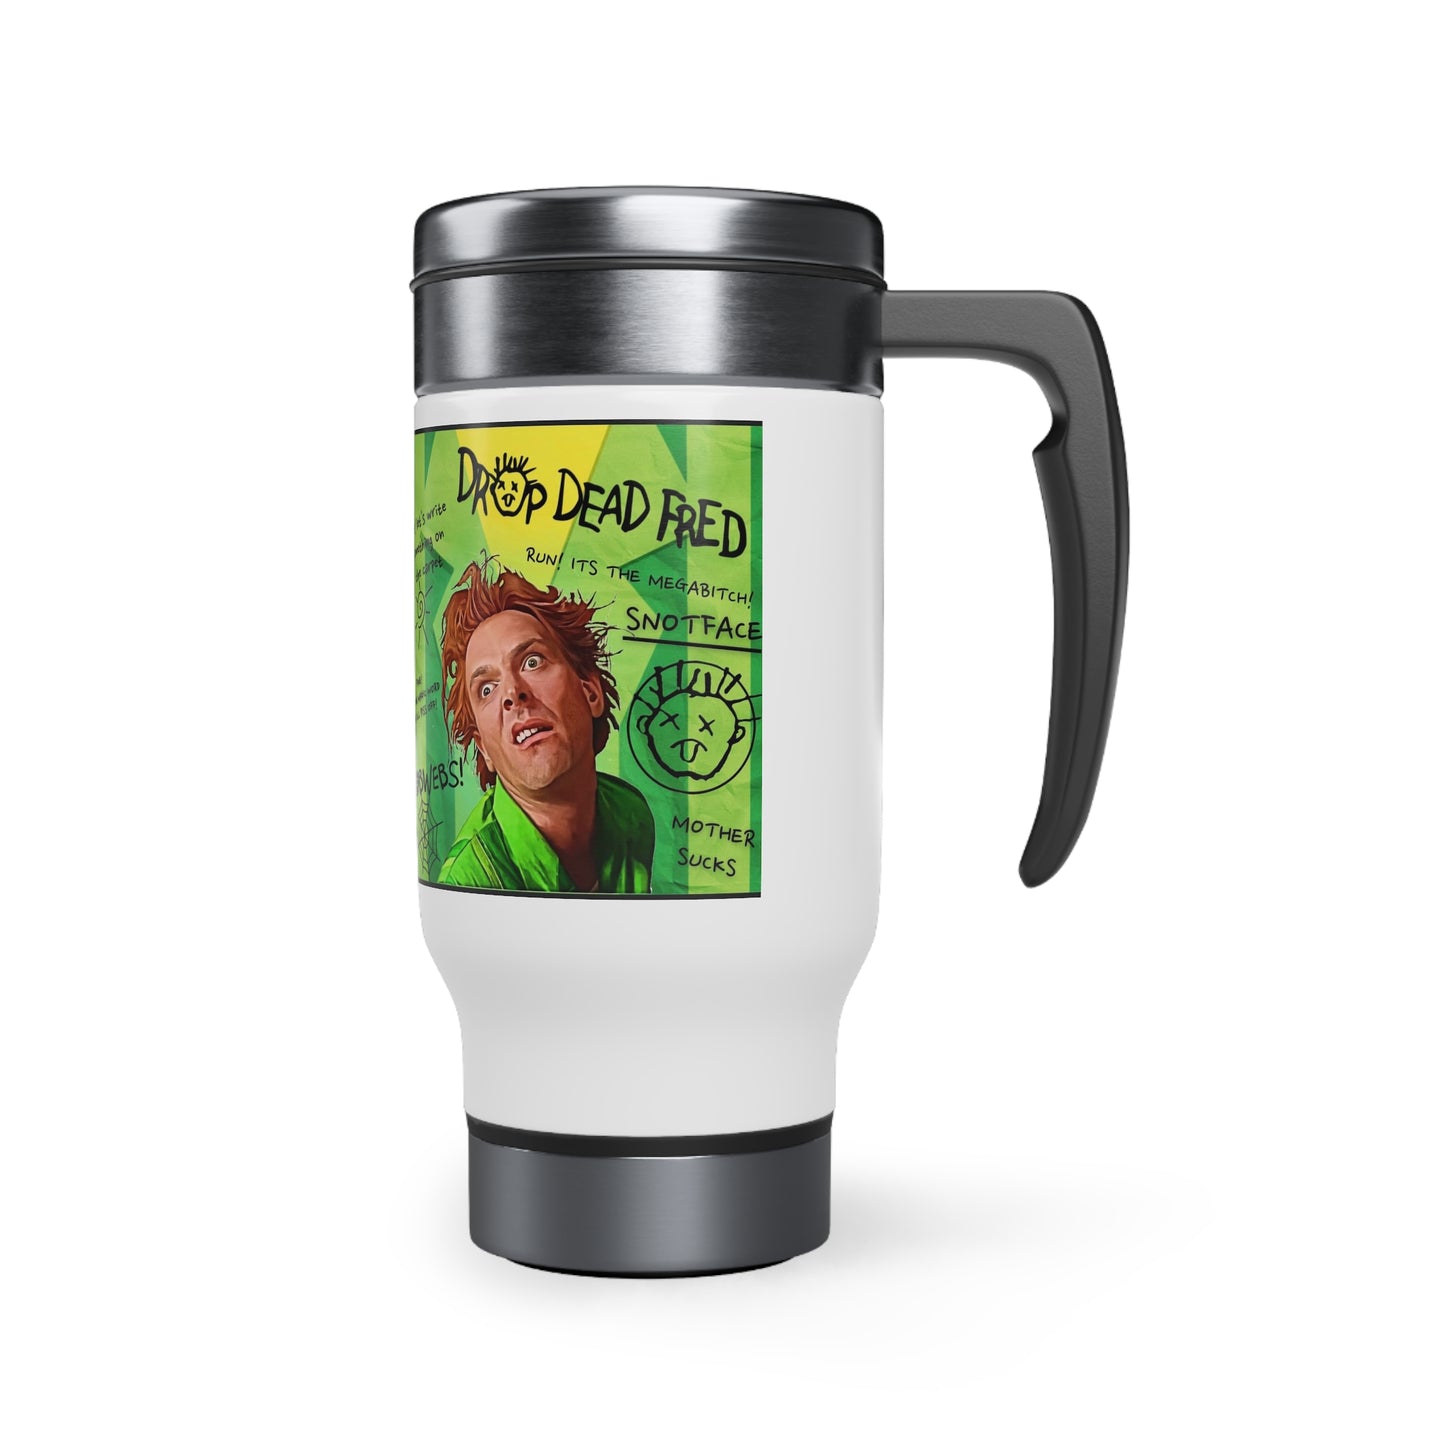 Drop Dead Fred Stainless Steel Travel Mug with Handle, 14oz